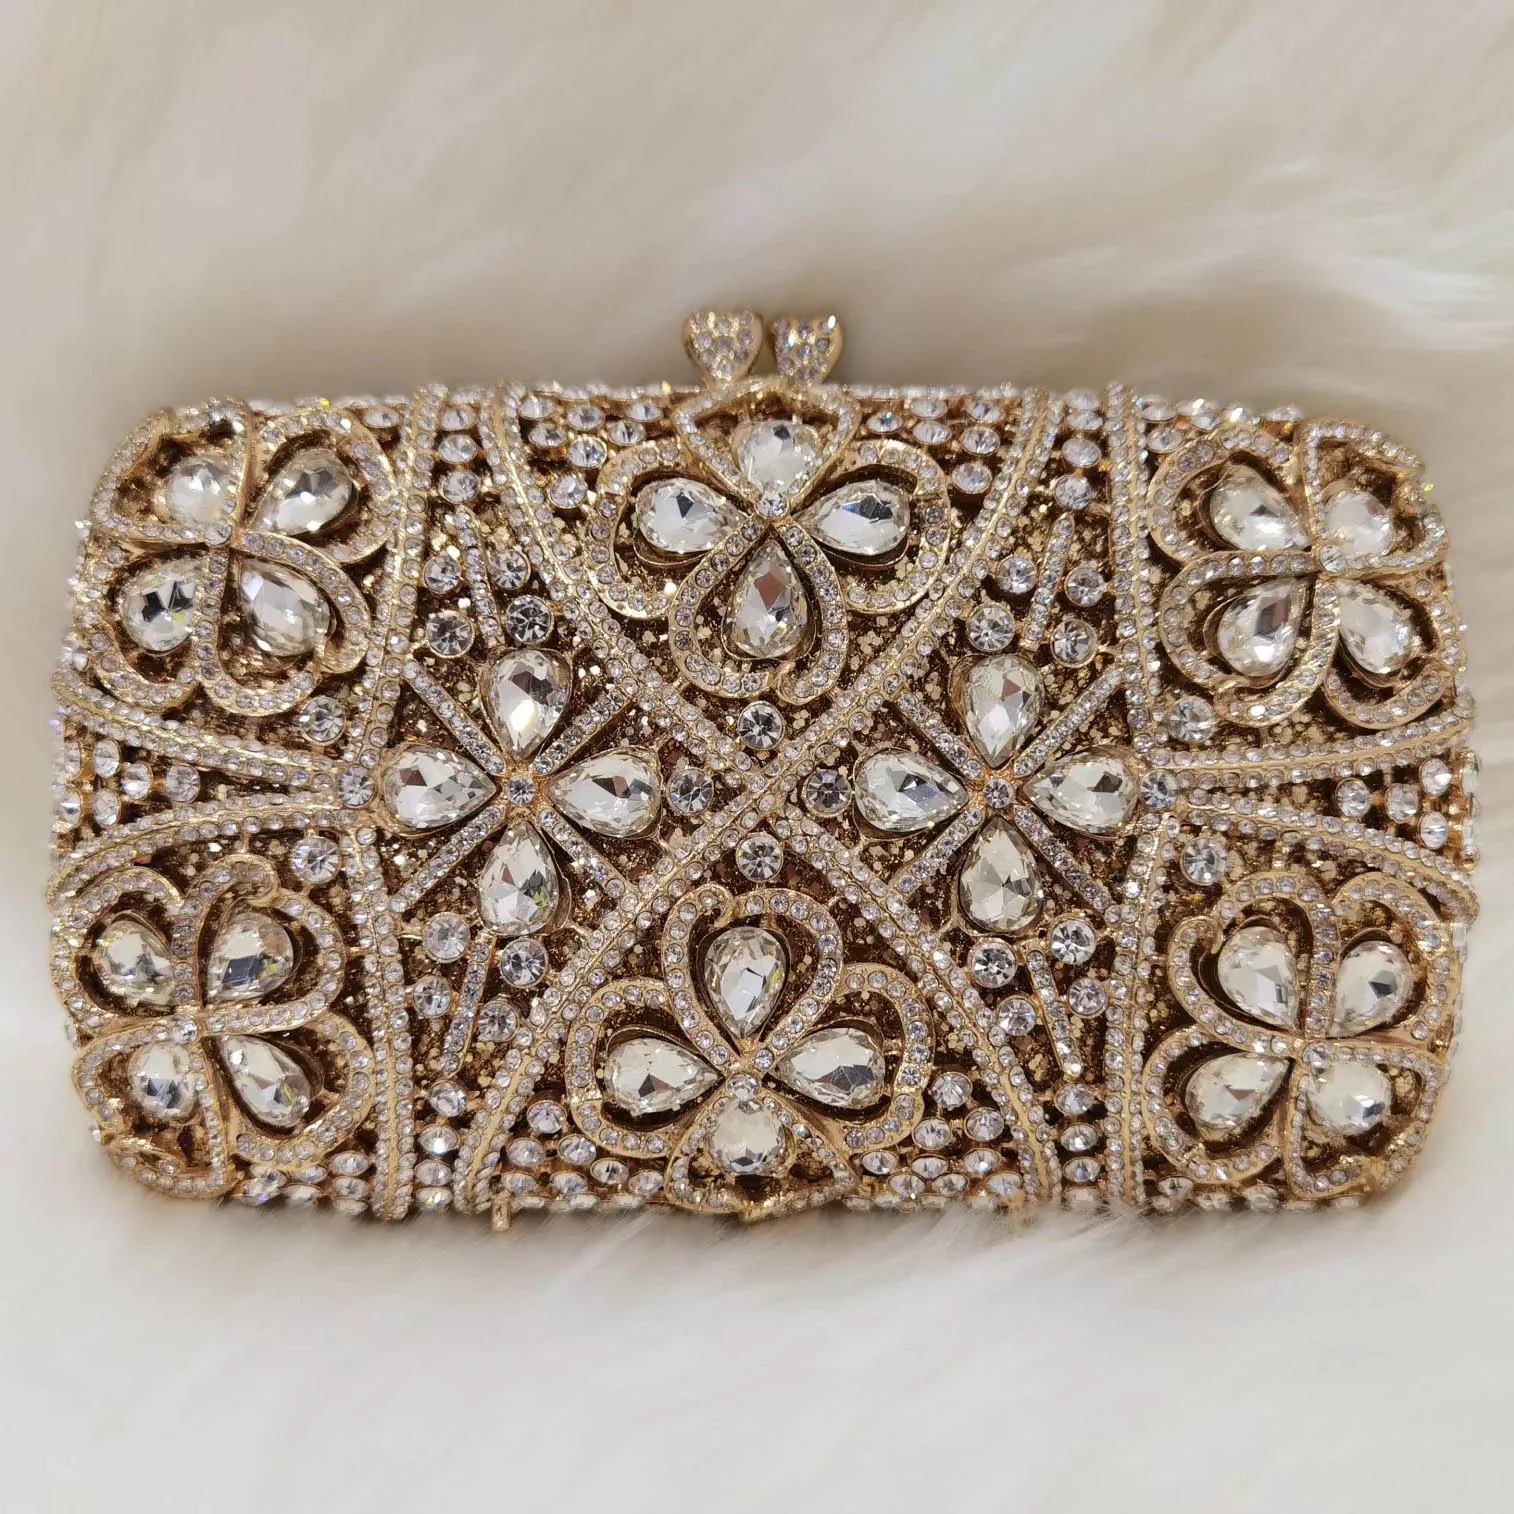 Buy Crystal Clutch Online In India - Etsy India